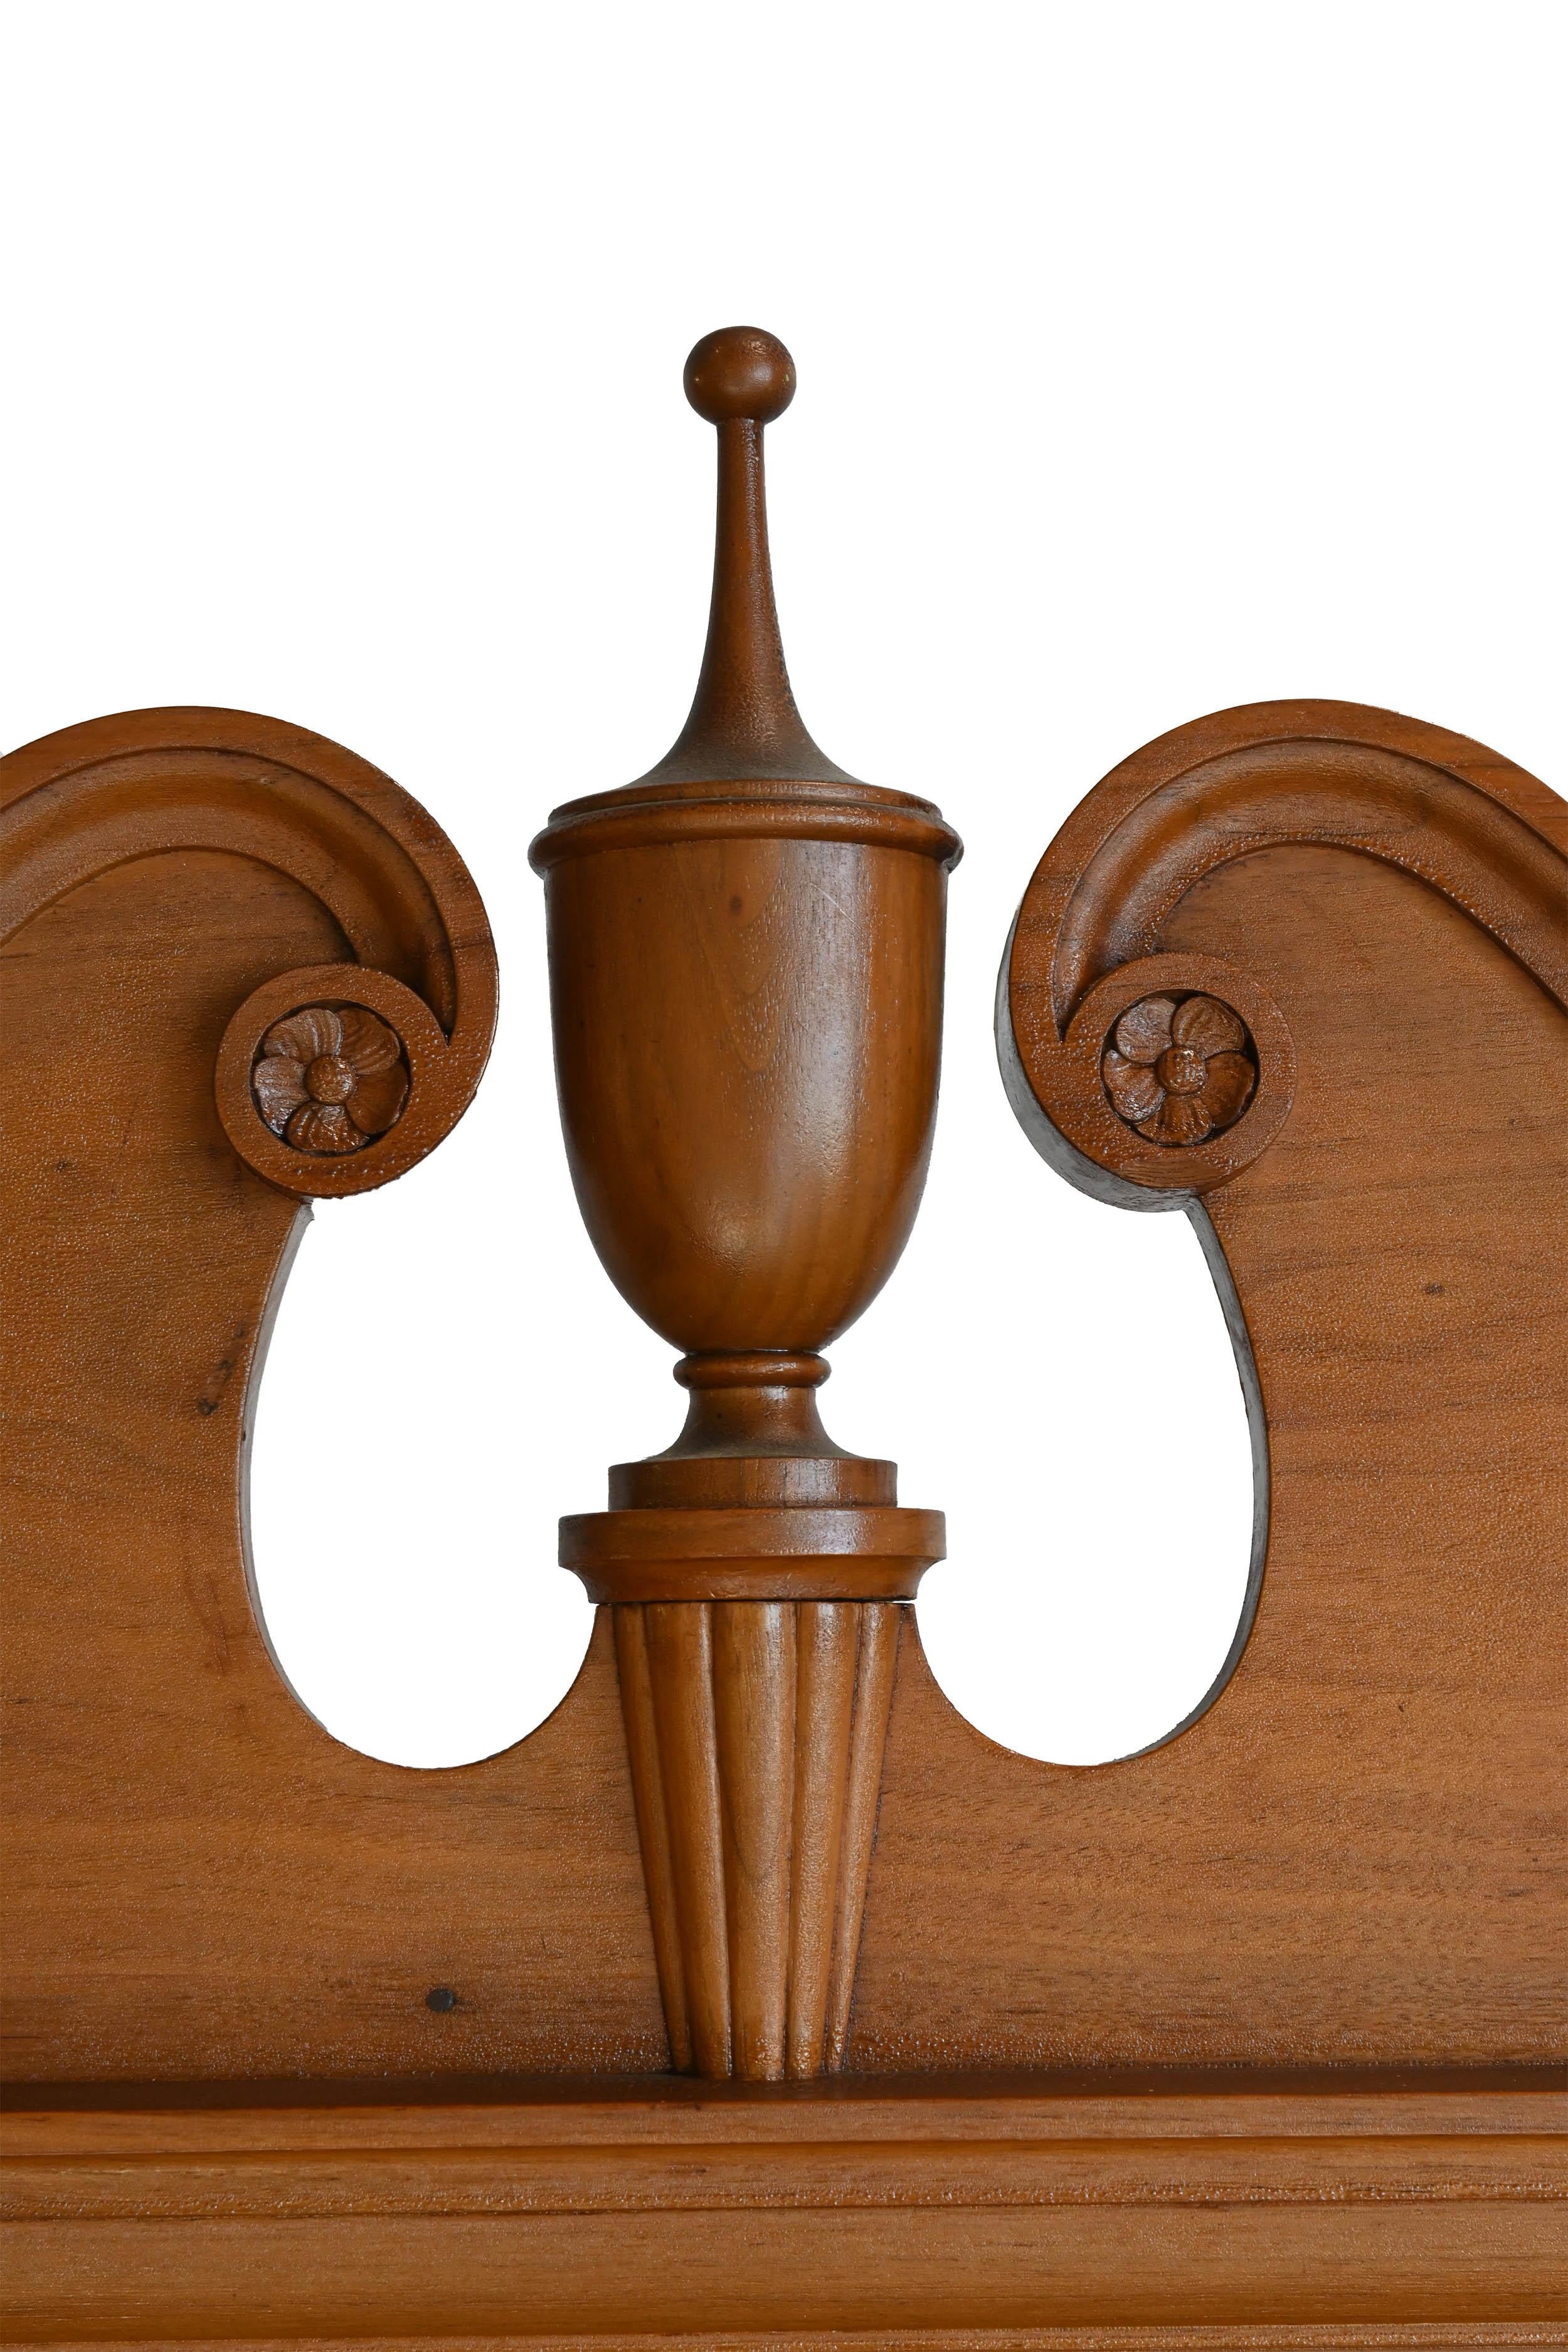 American Classical Walnut Corner Cabinet with Arched Window and Urn Finial